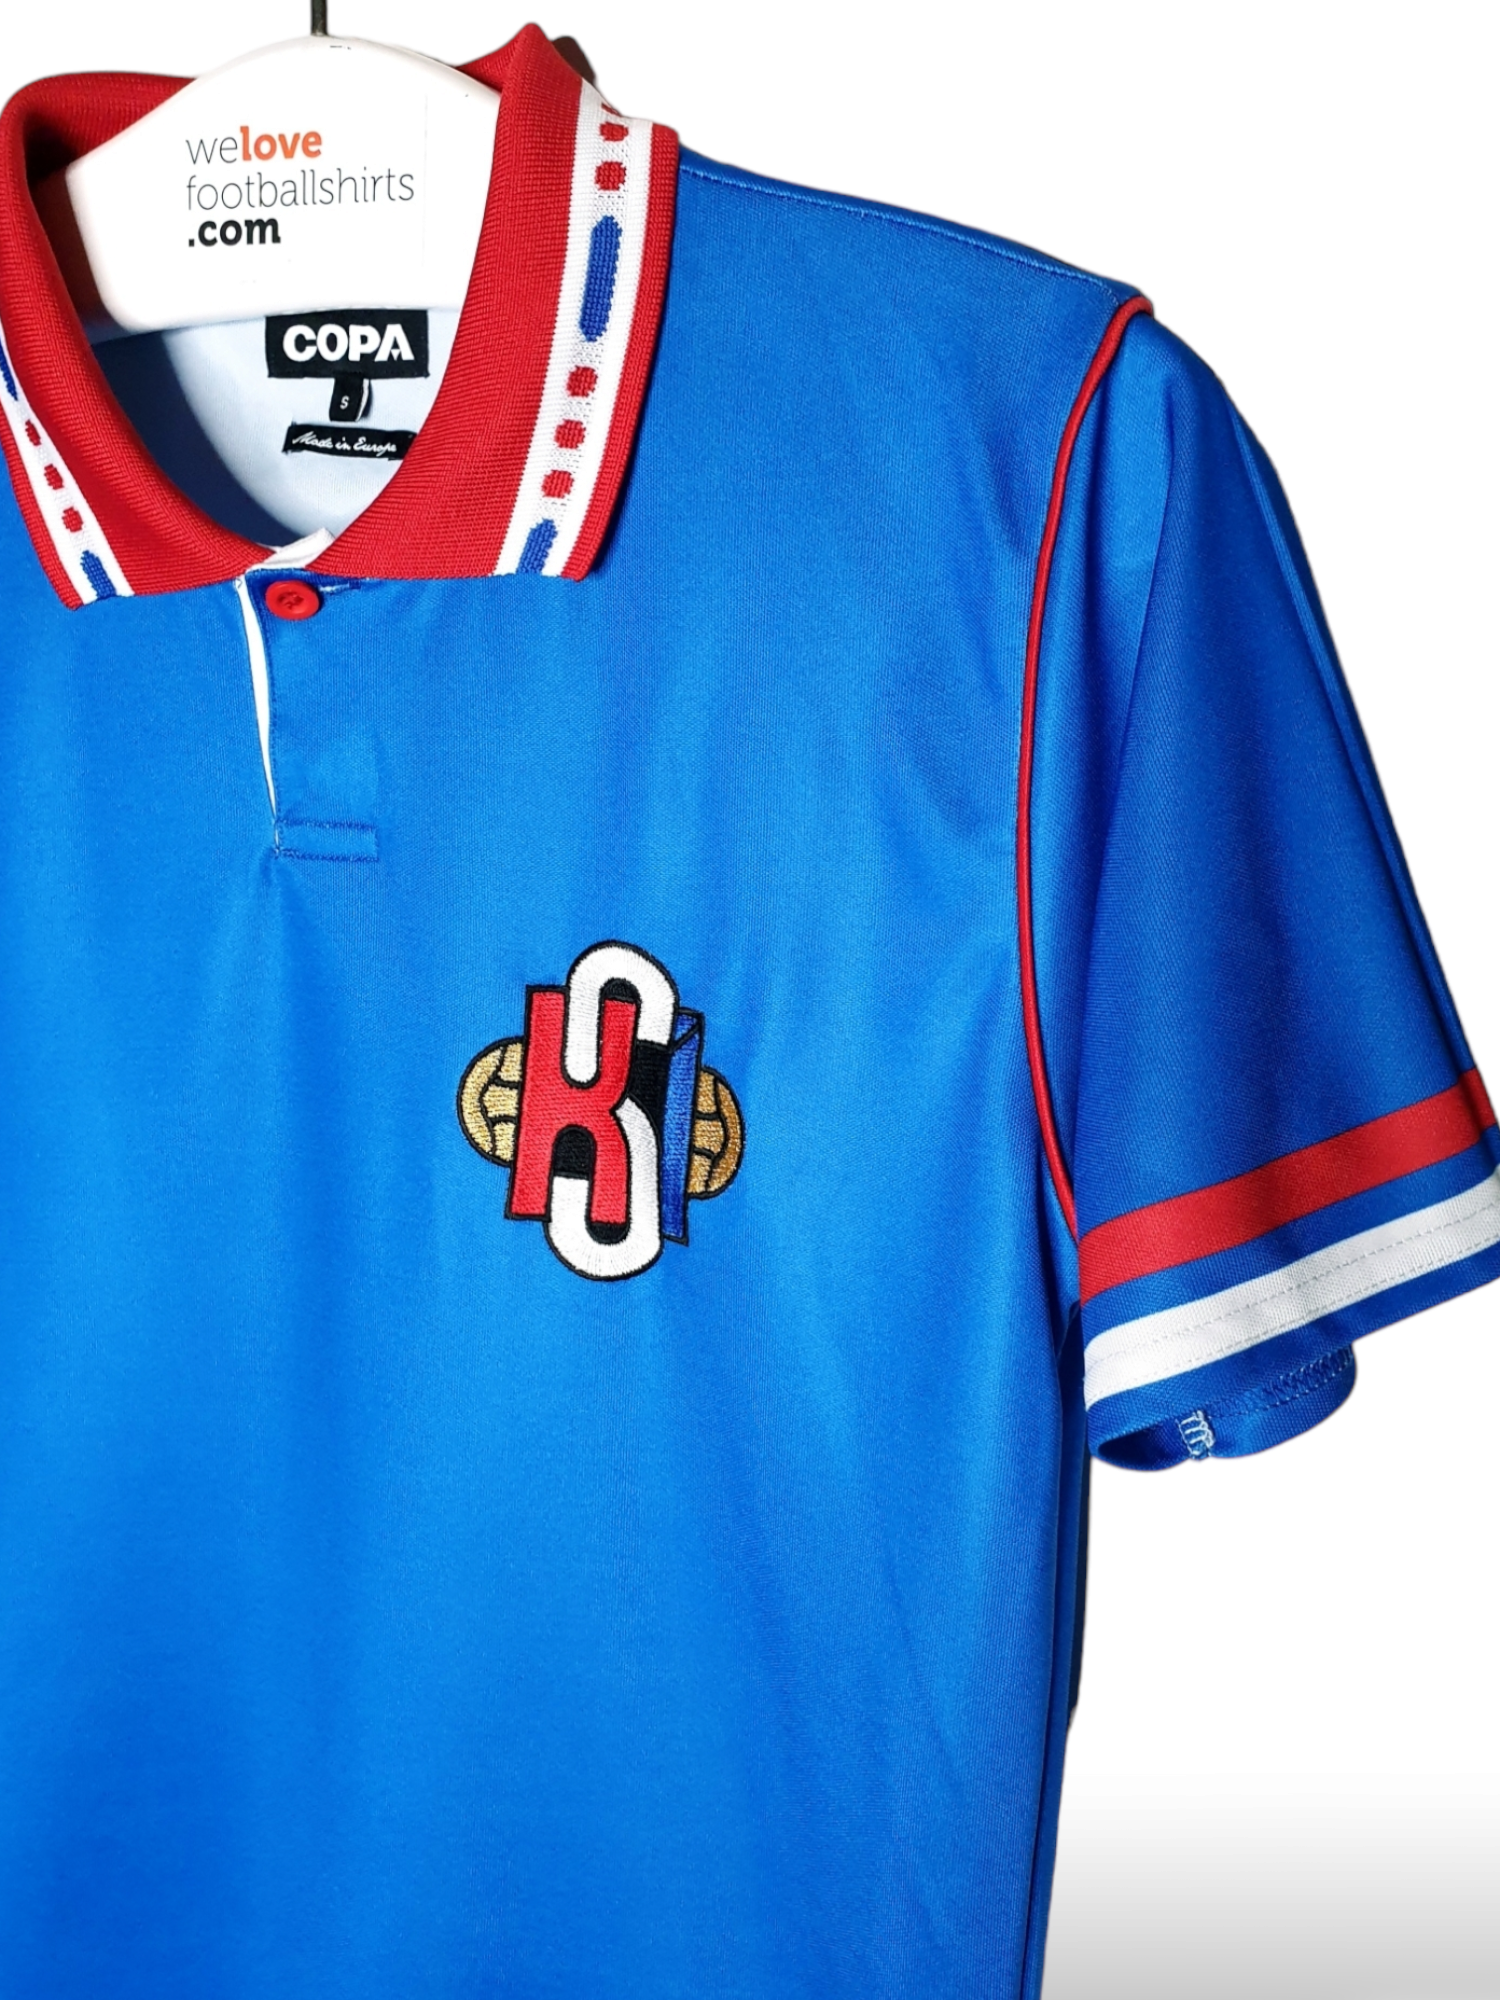 Iceland men's national team retro collector's items